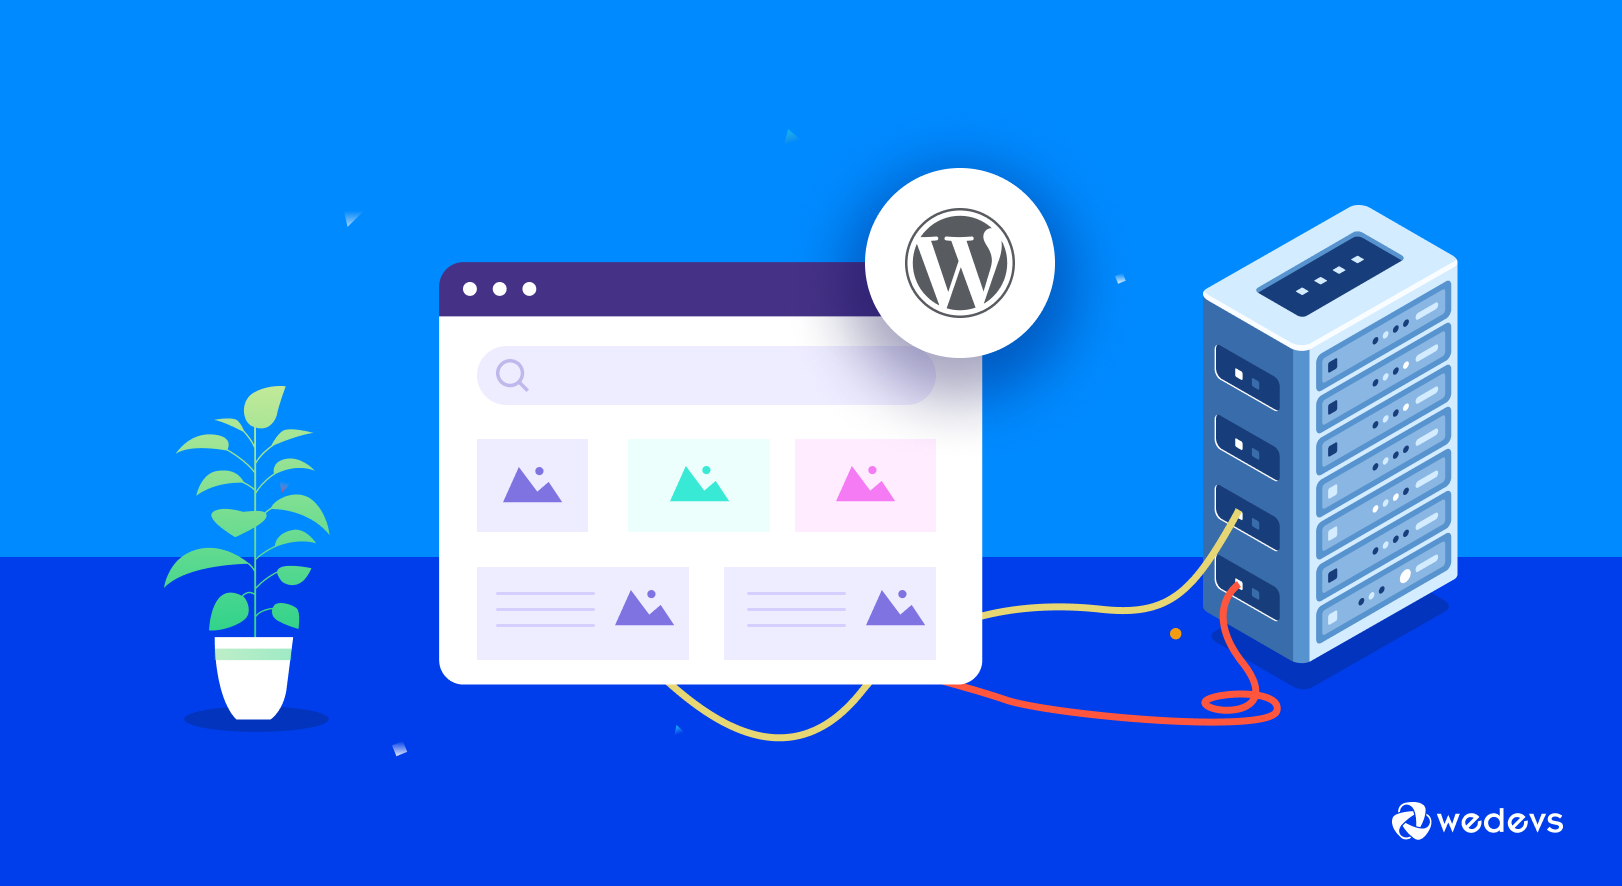 6 Things To Consider When Selecting a WordPress Hosting for Your Business